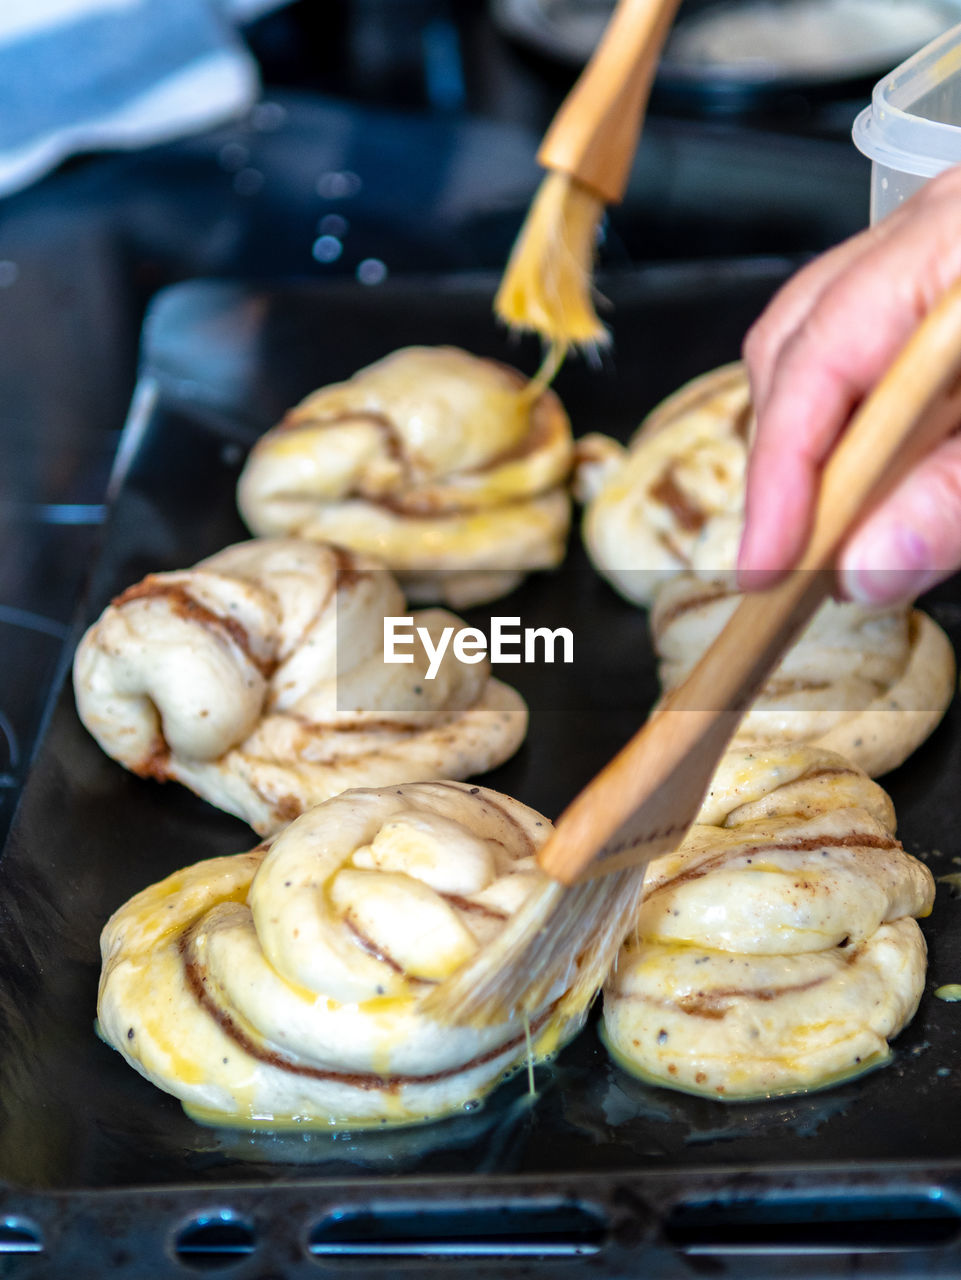 Cropped hand applying egg on cinnamon rolls in backing sheet